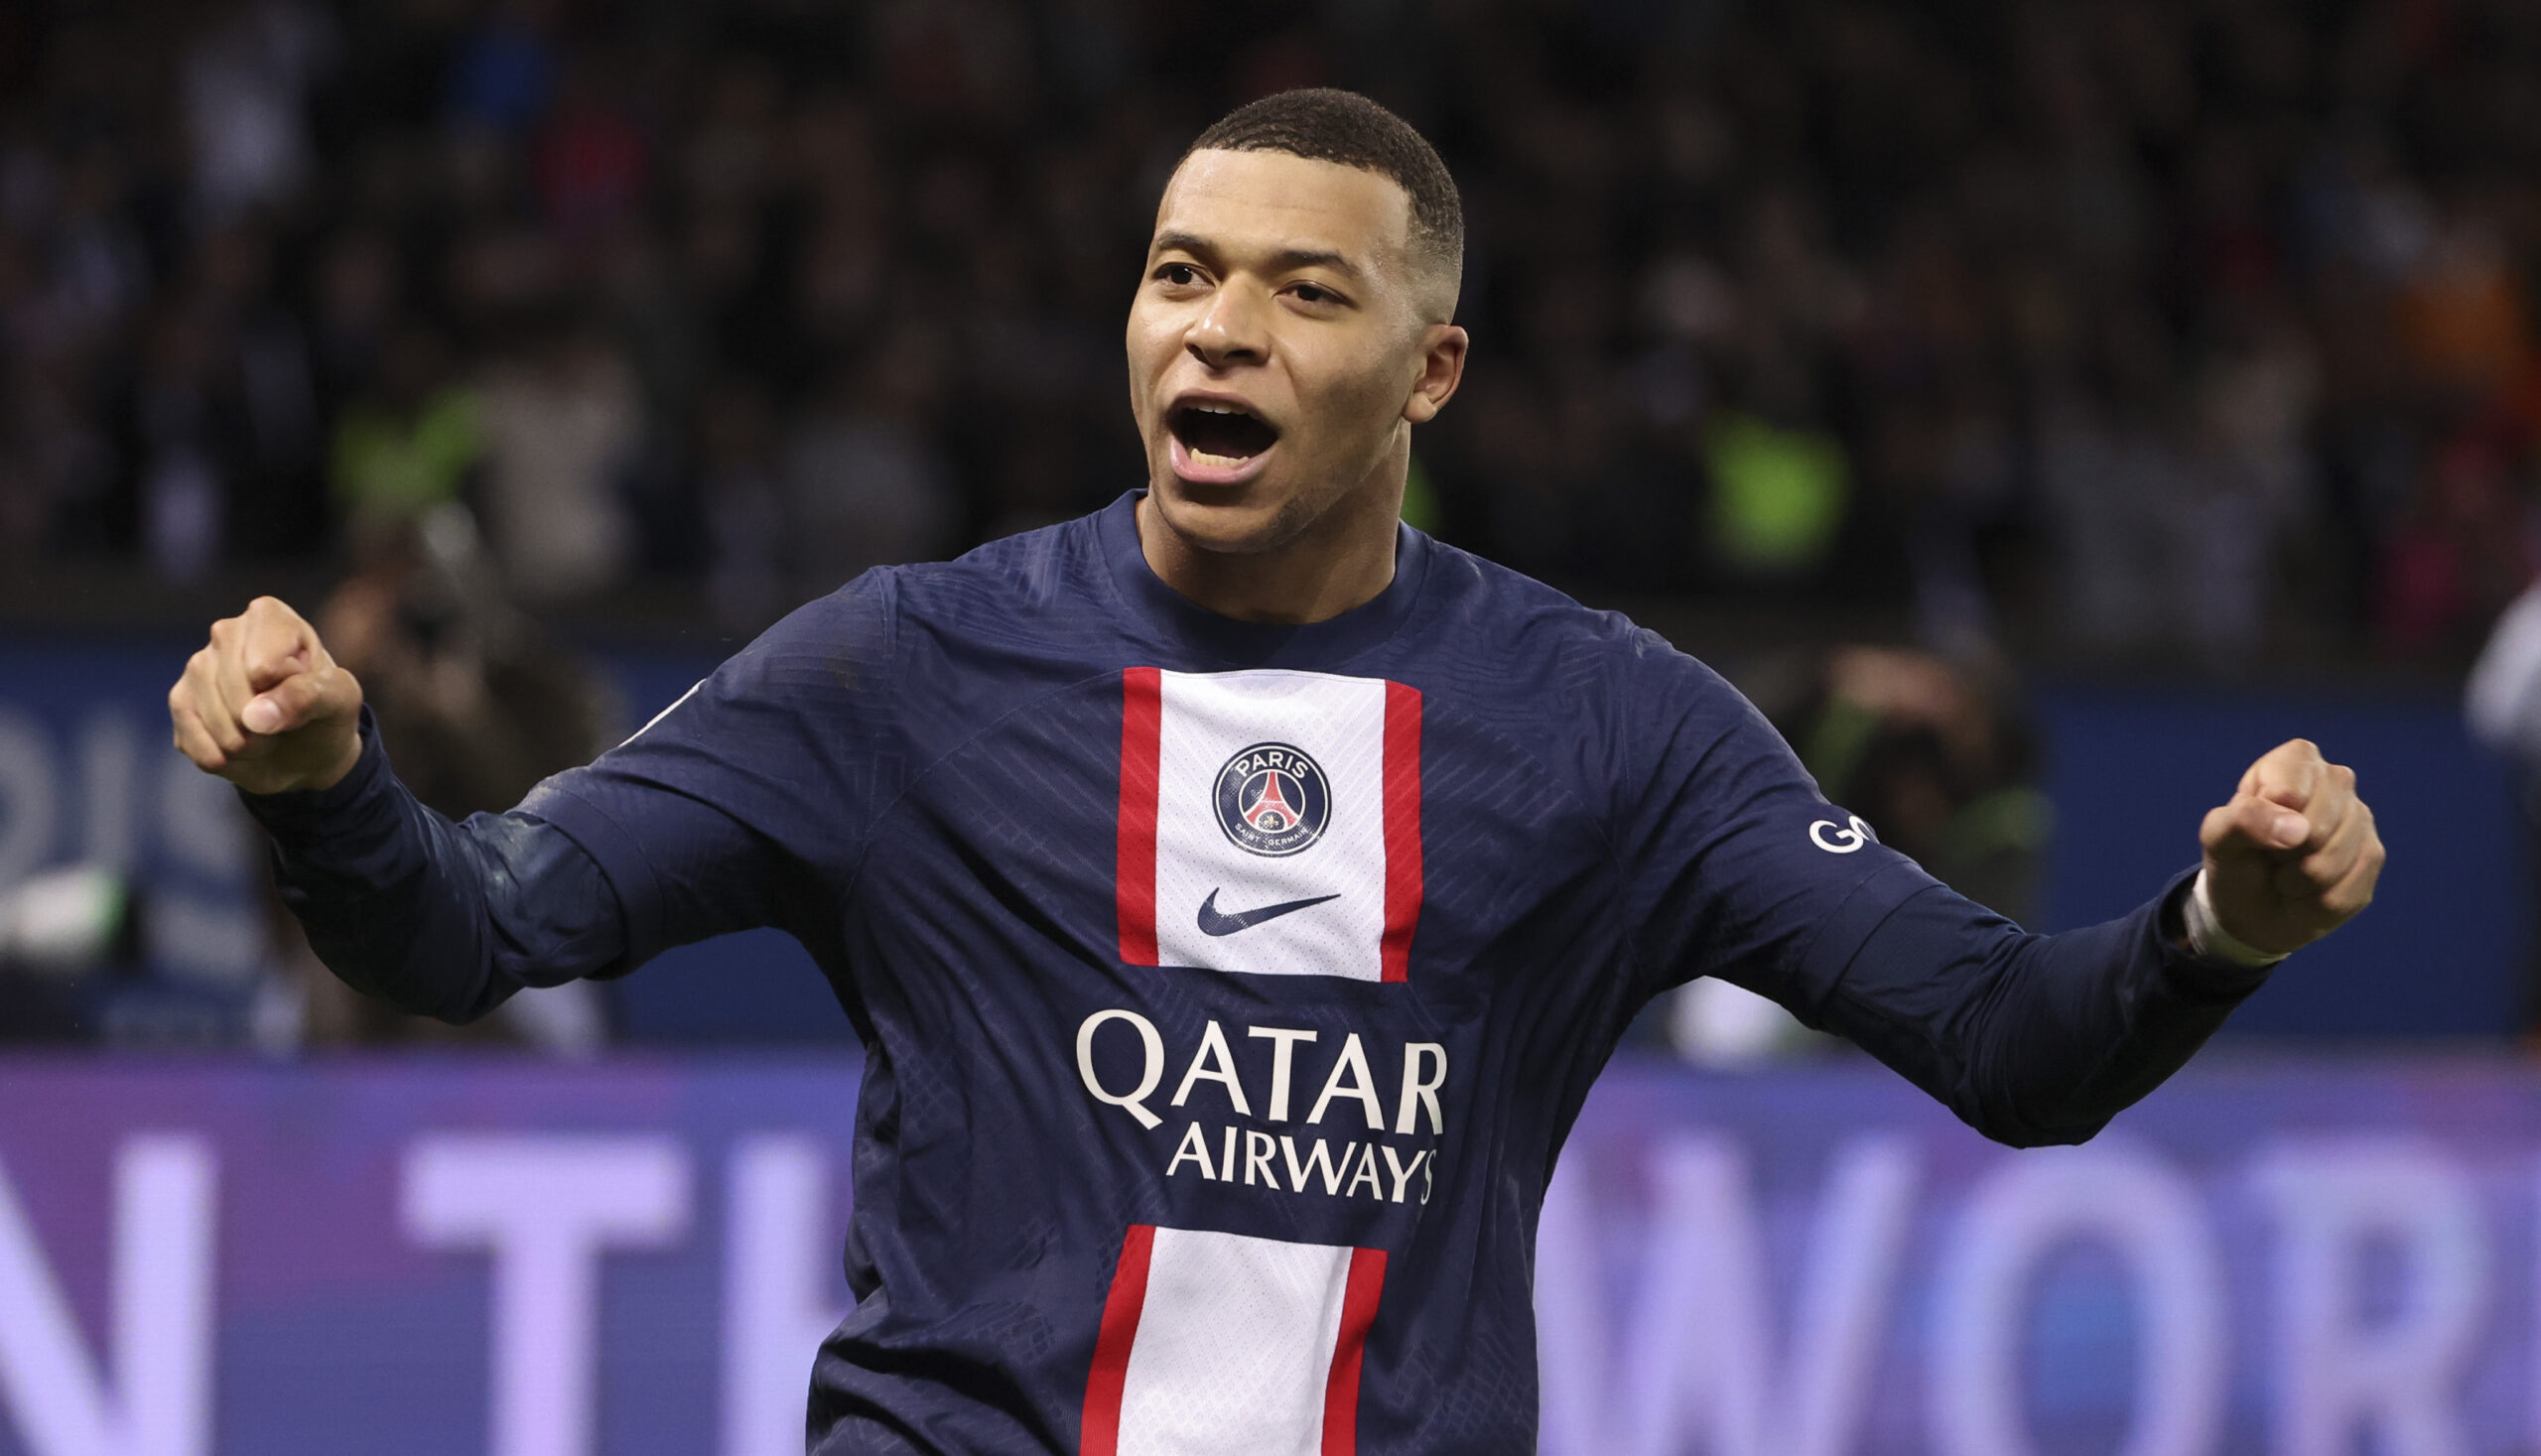 Mbappe’s potential Saudi move would alter the footballing landscape forever